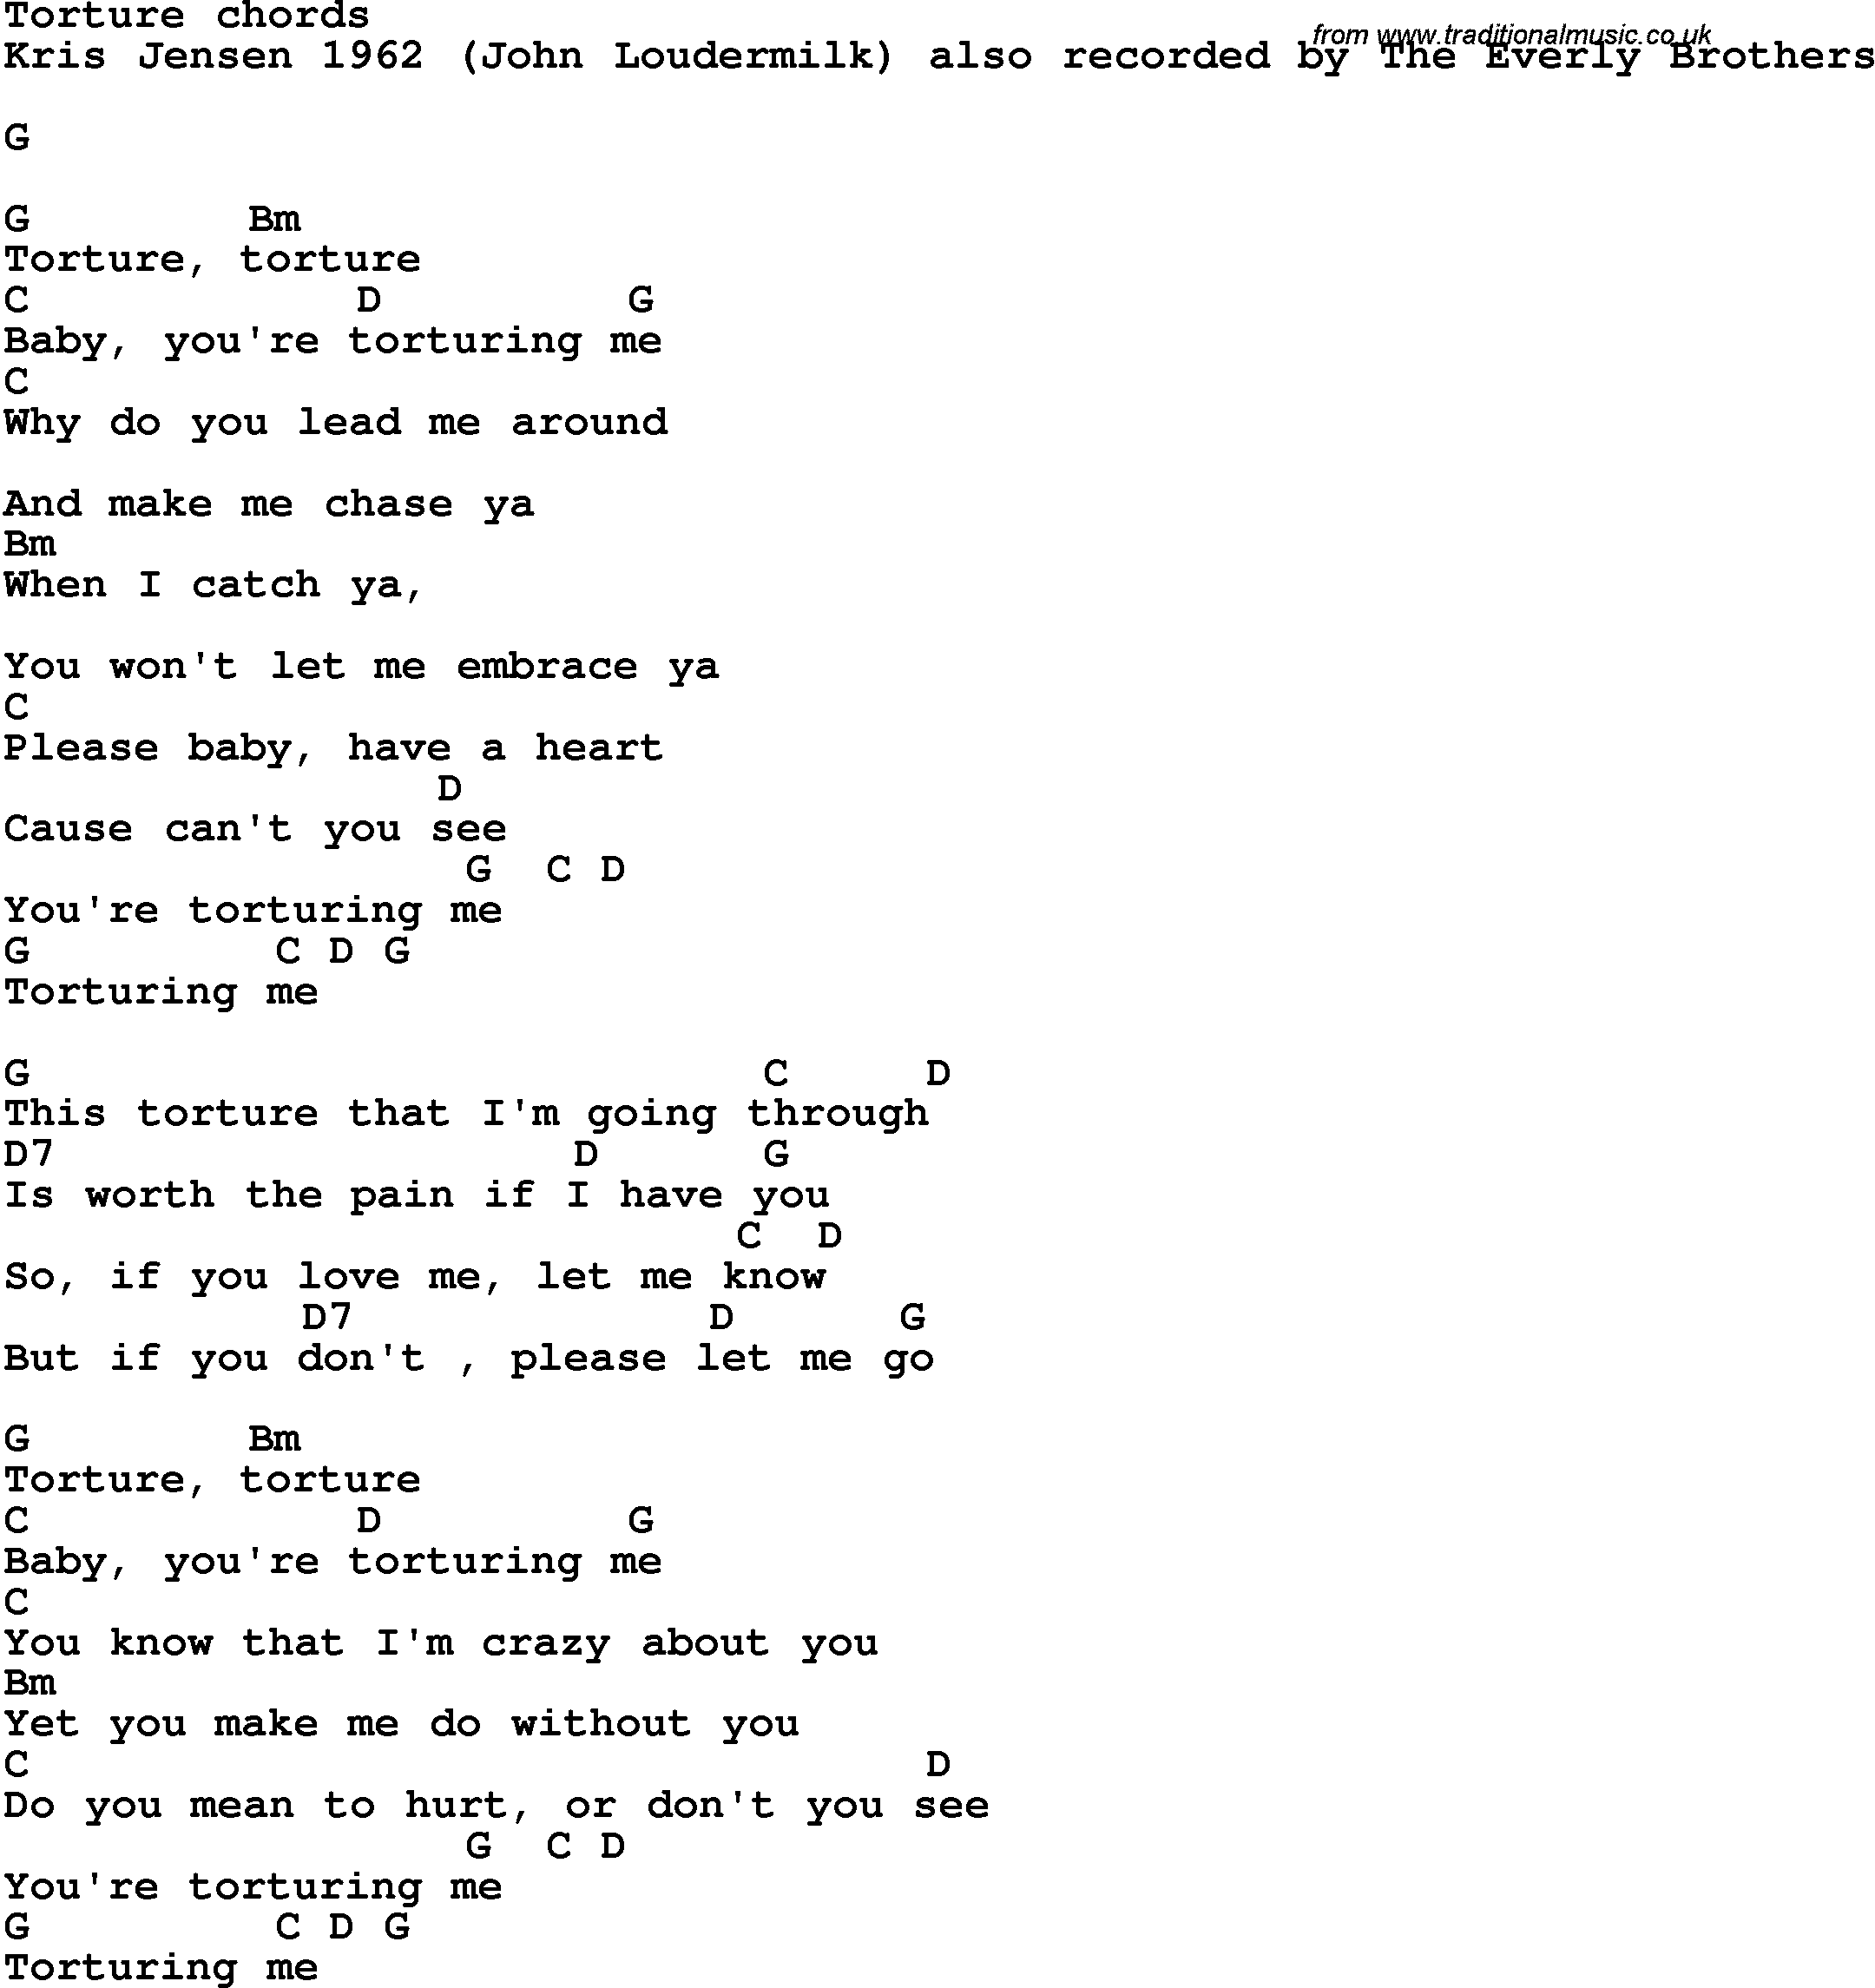 Song Lyrics with guitar chords for Torture